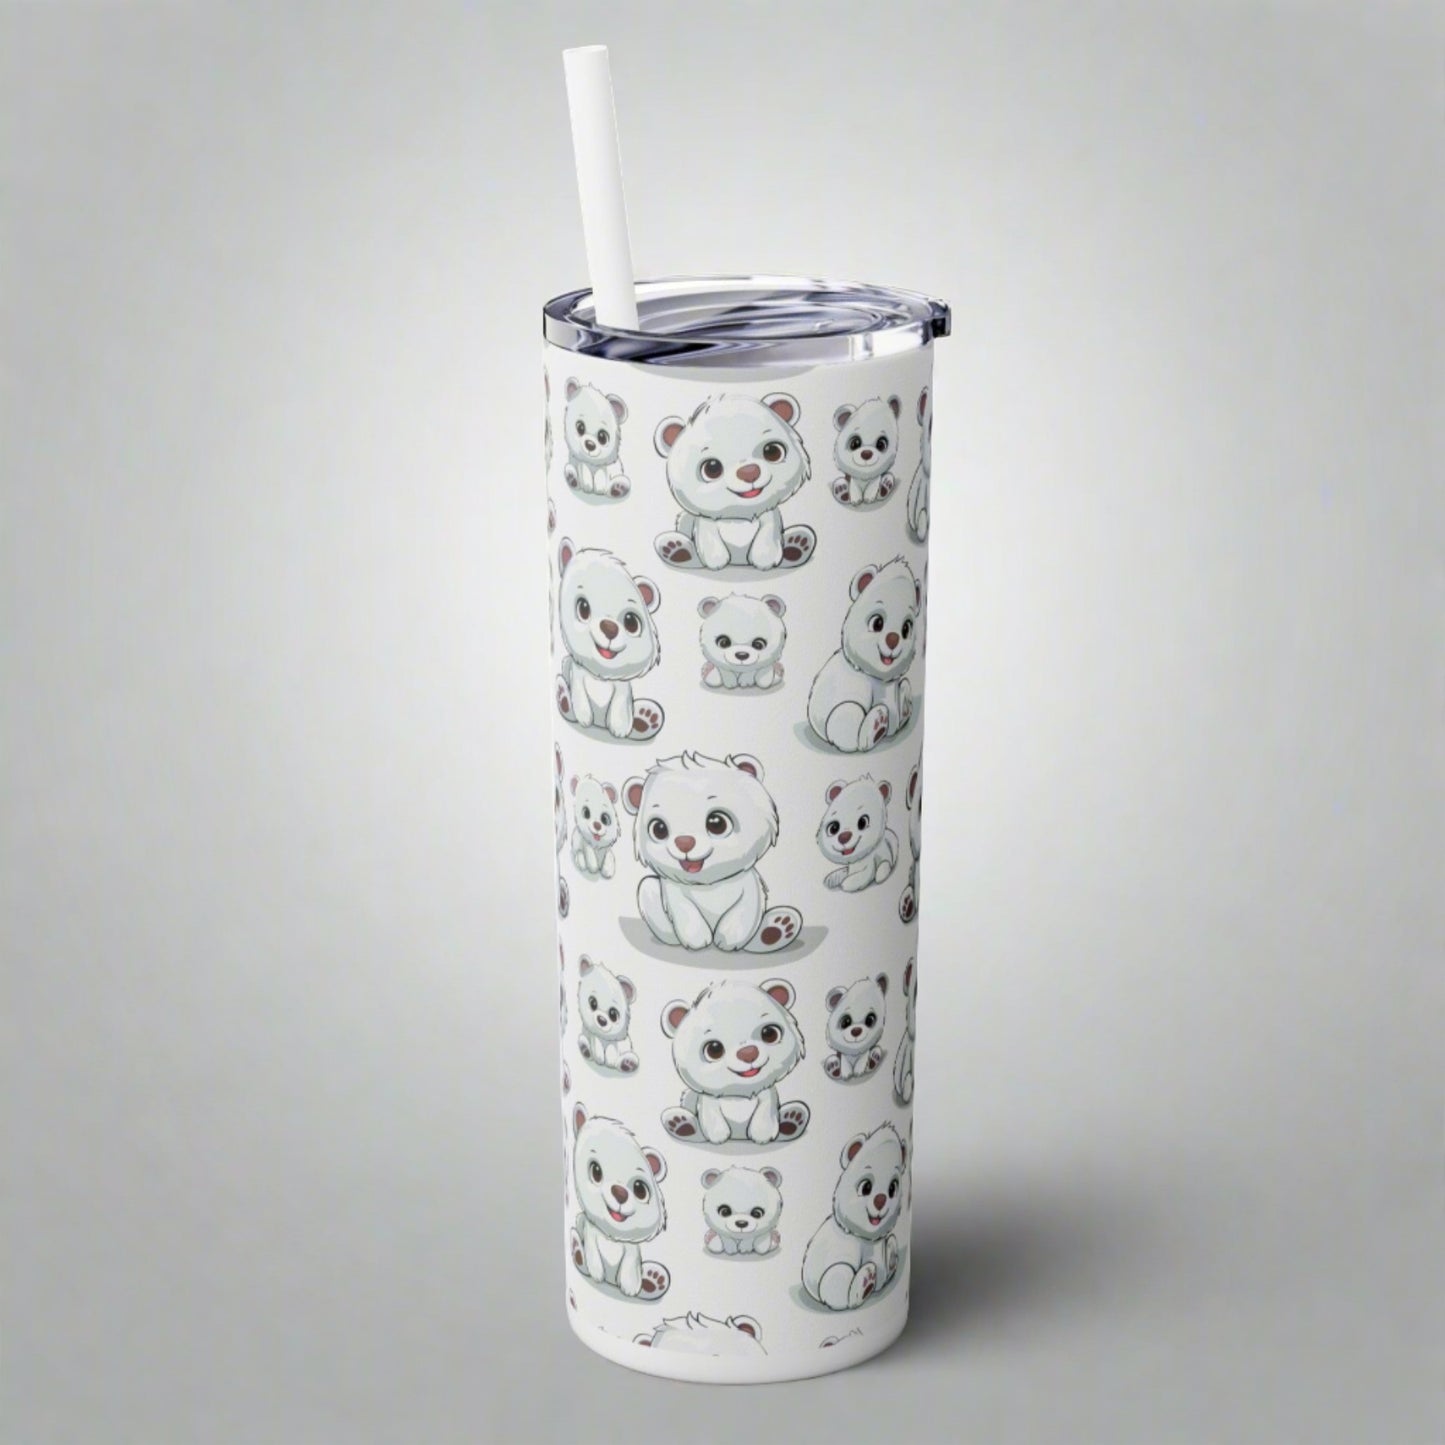 Insulated 20 oz Tumbler with Lid & Straw, Polar Bear Cubs - Double-walled Stainless Steel, Keeps Drinks Hot or Cold